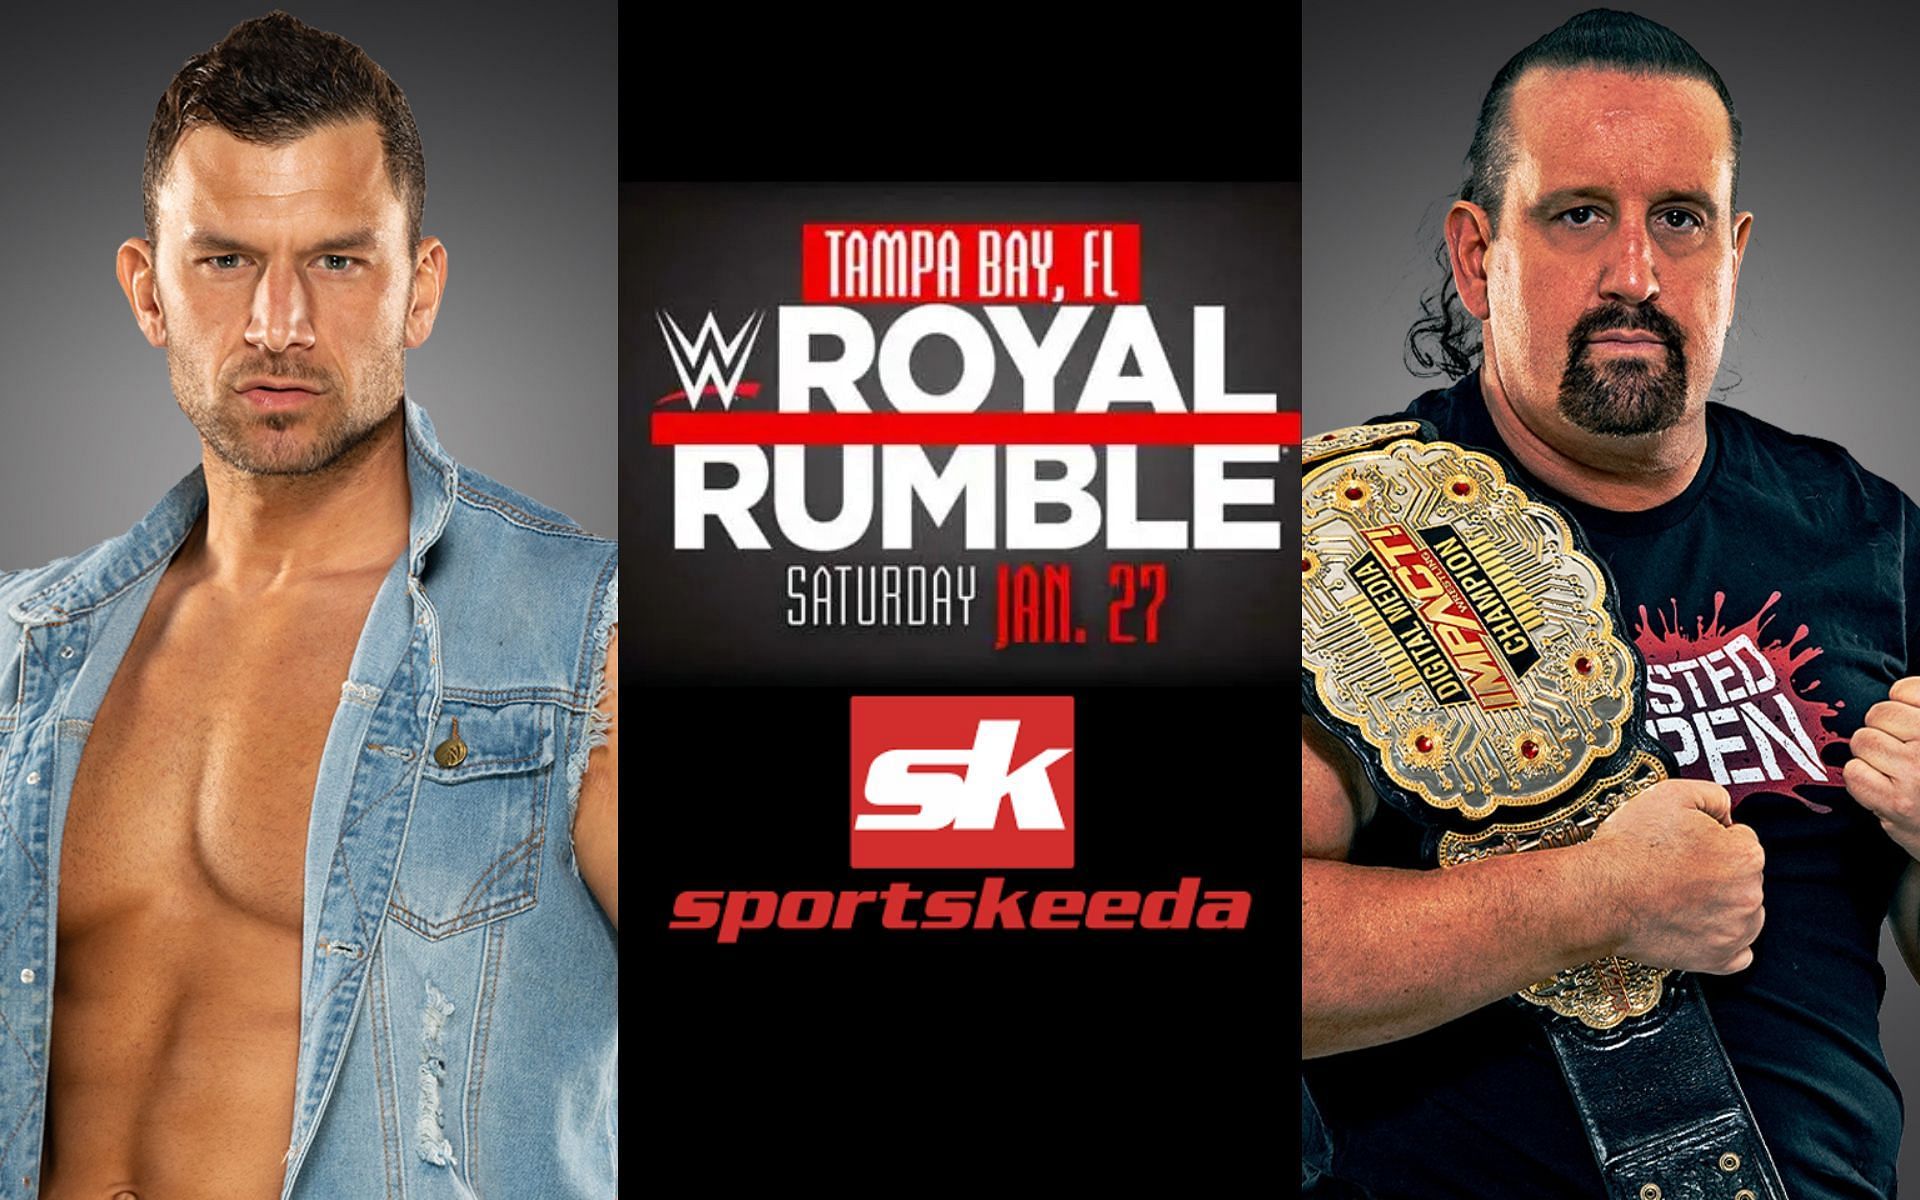 Could we see Fandango or Tommy Dreamer at The Royal Rumble?